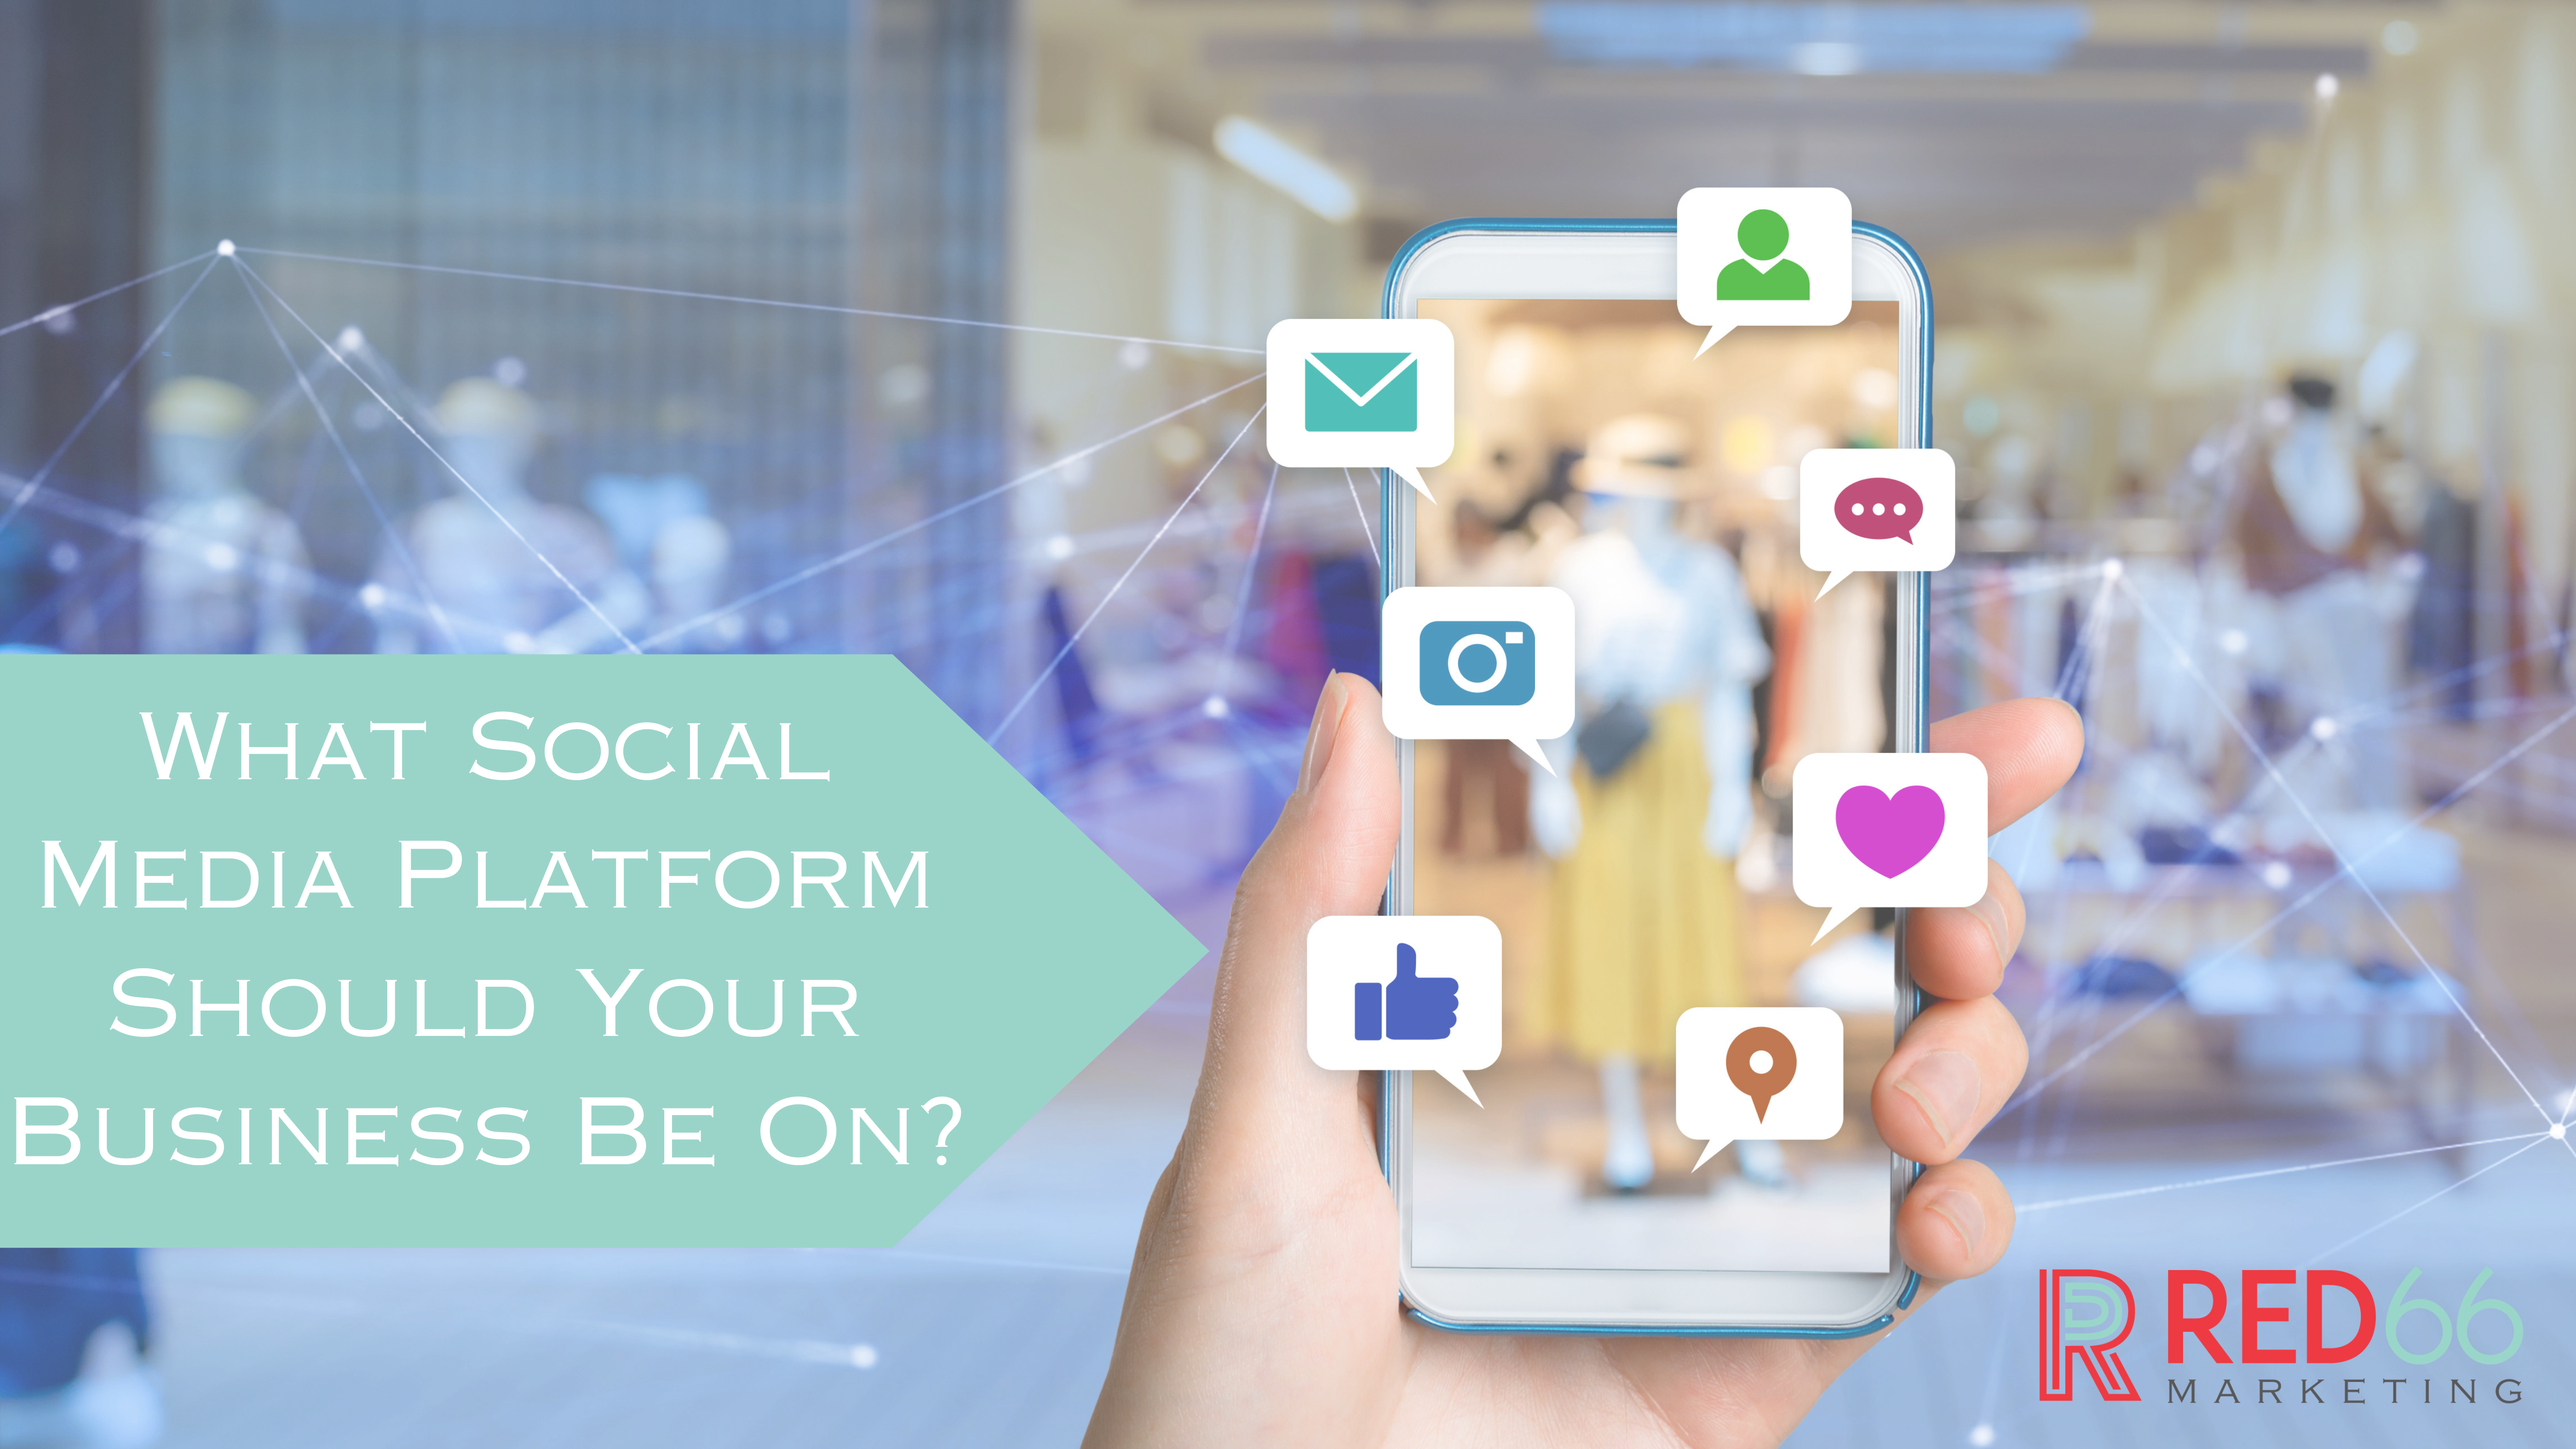 What Social Media Platforms Should Your Business Be On?